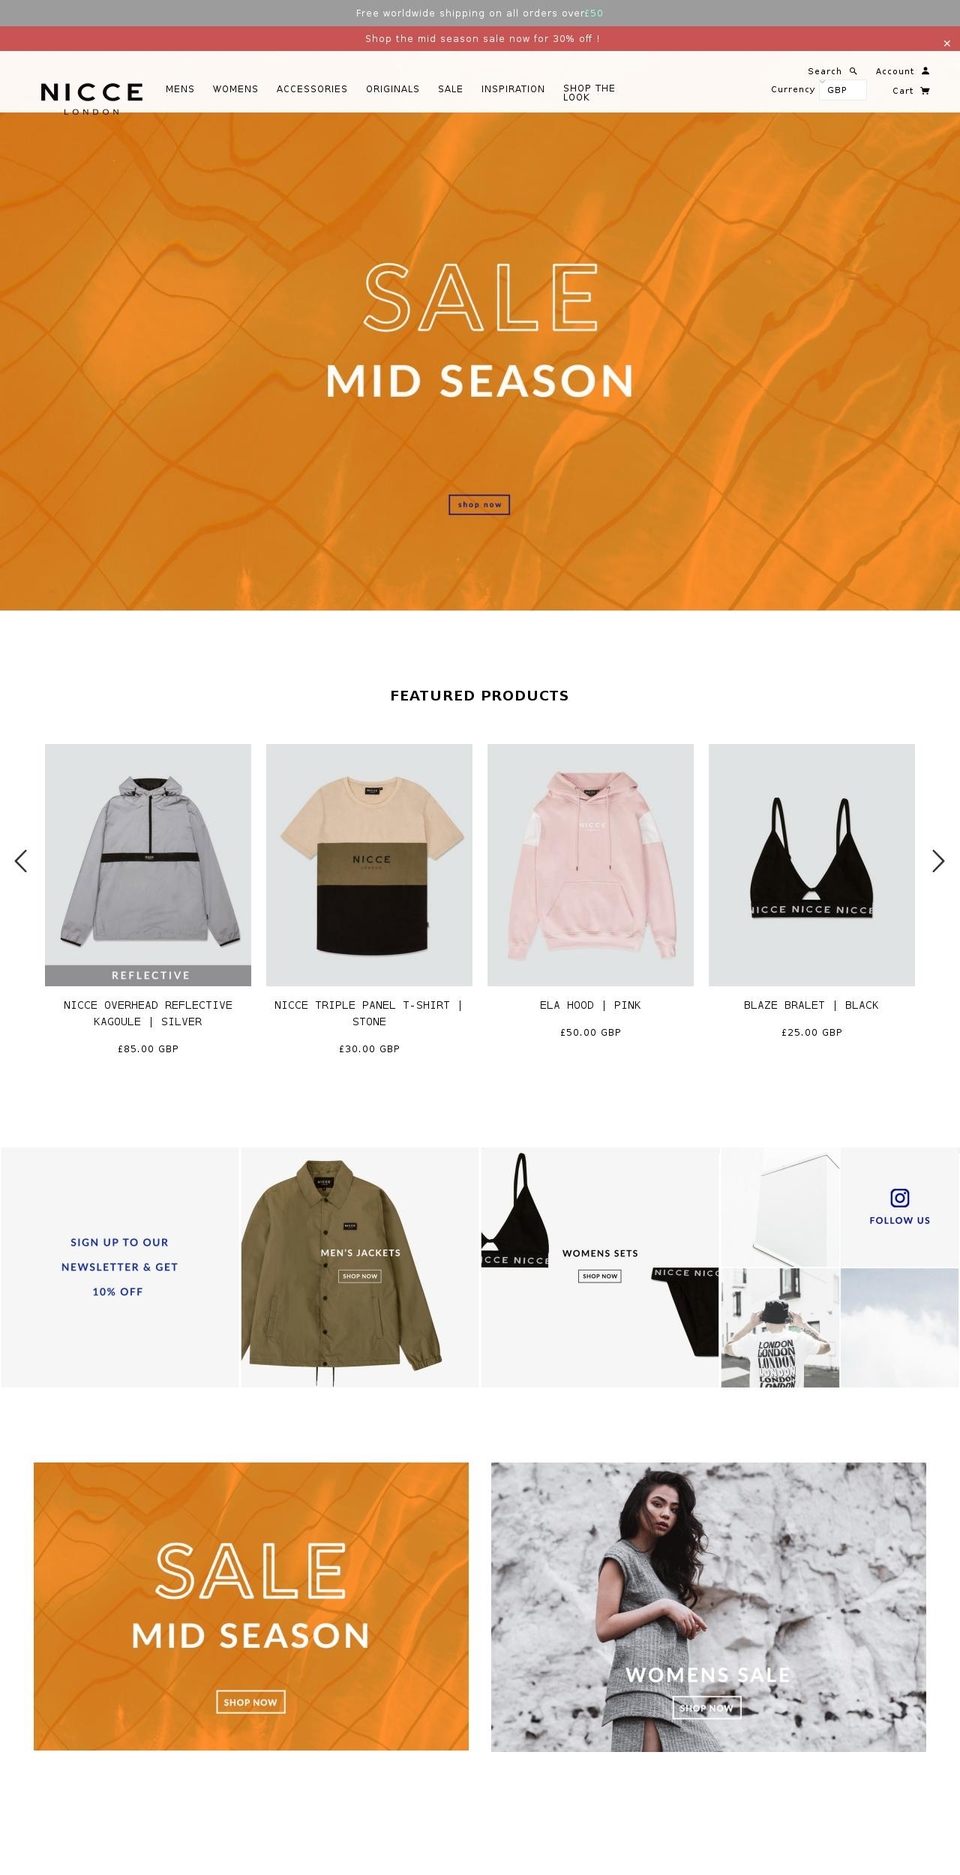 Symmetry Shopify theme site example nicceclothing.com